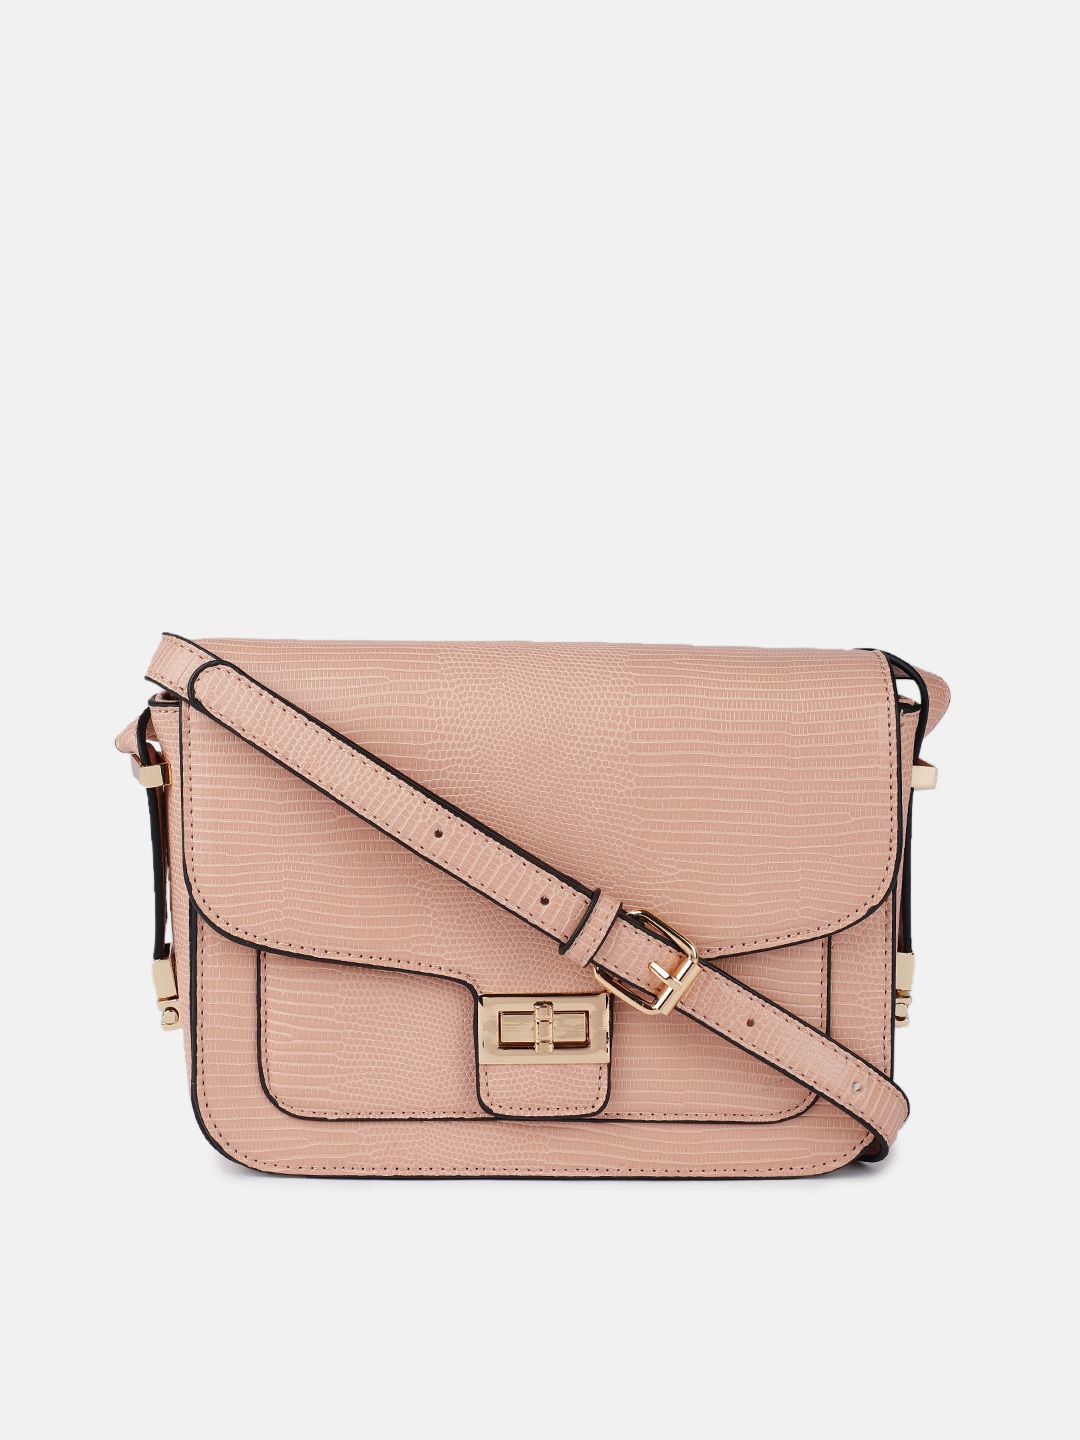 Mast & Harbour Dusty Pink Textured PU Structured Sling Bag Price in India